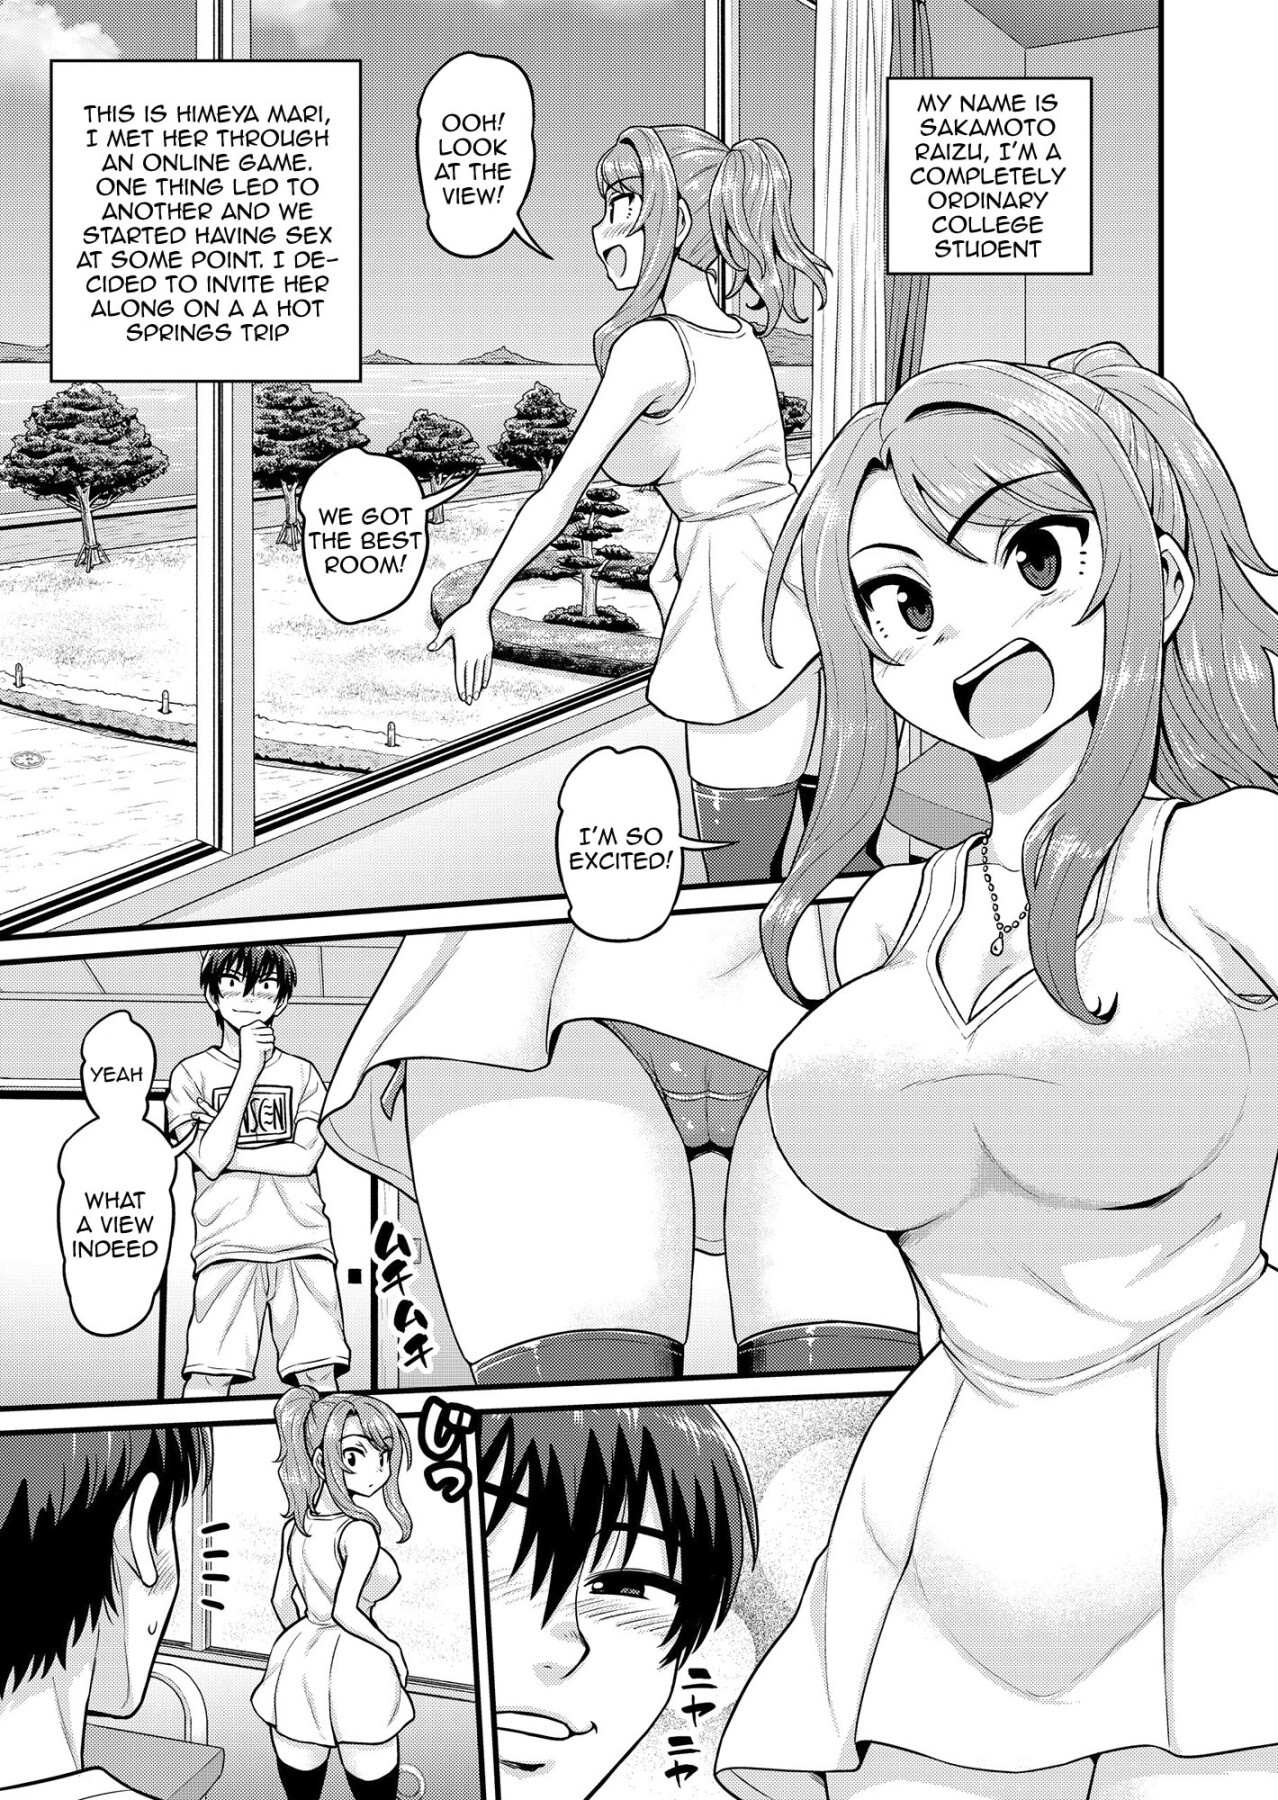 Hentai Manga Comic-Smashing With Your Gamer Girl Friend At The Hot Spring - NTR version-Read-2